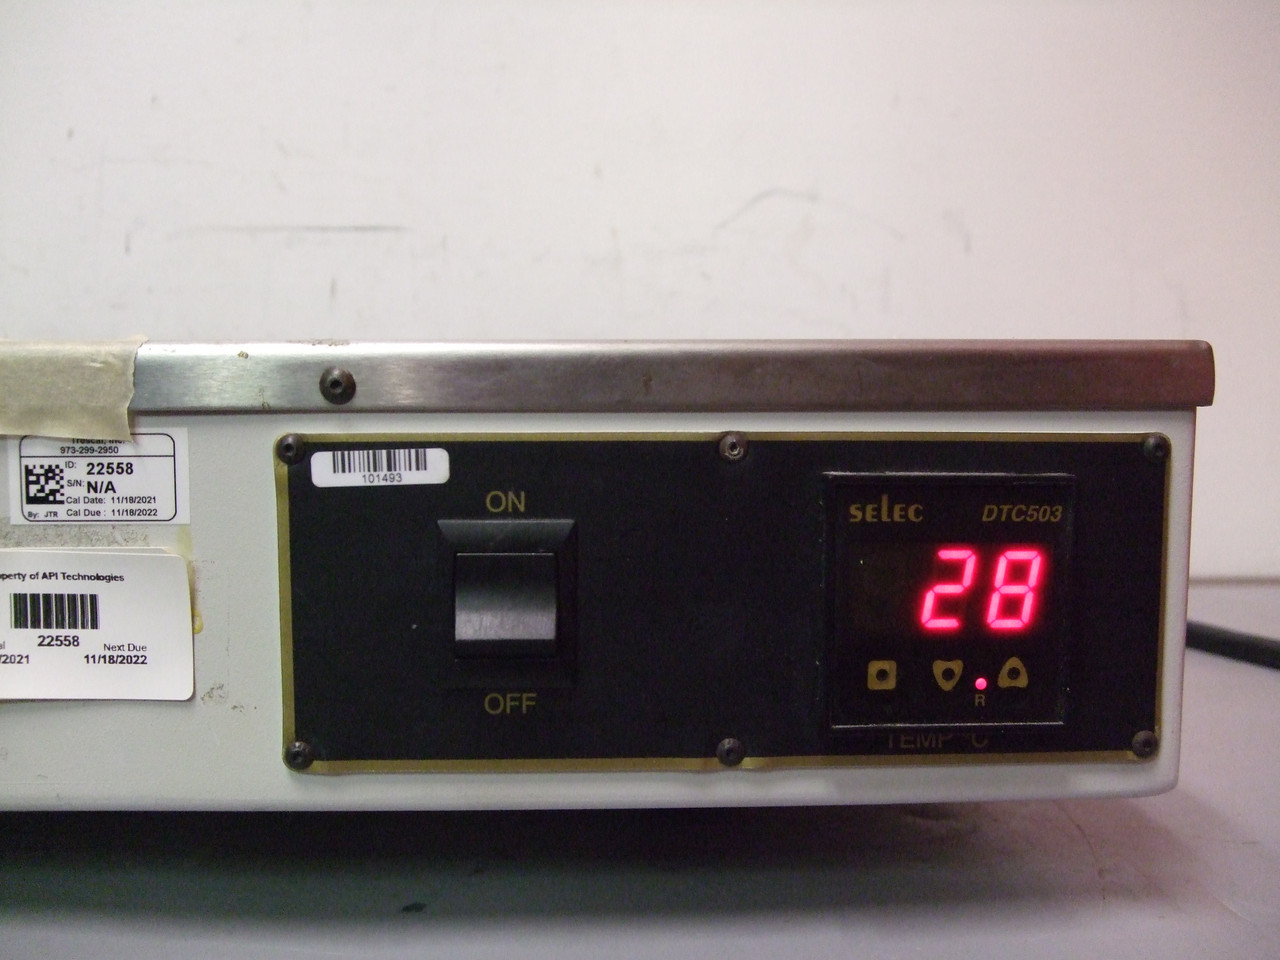 Automated Production Systems Inc. Model GF-SL Gold-Flow Hot Plate, 23" X 16"